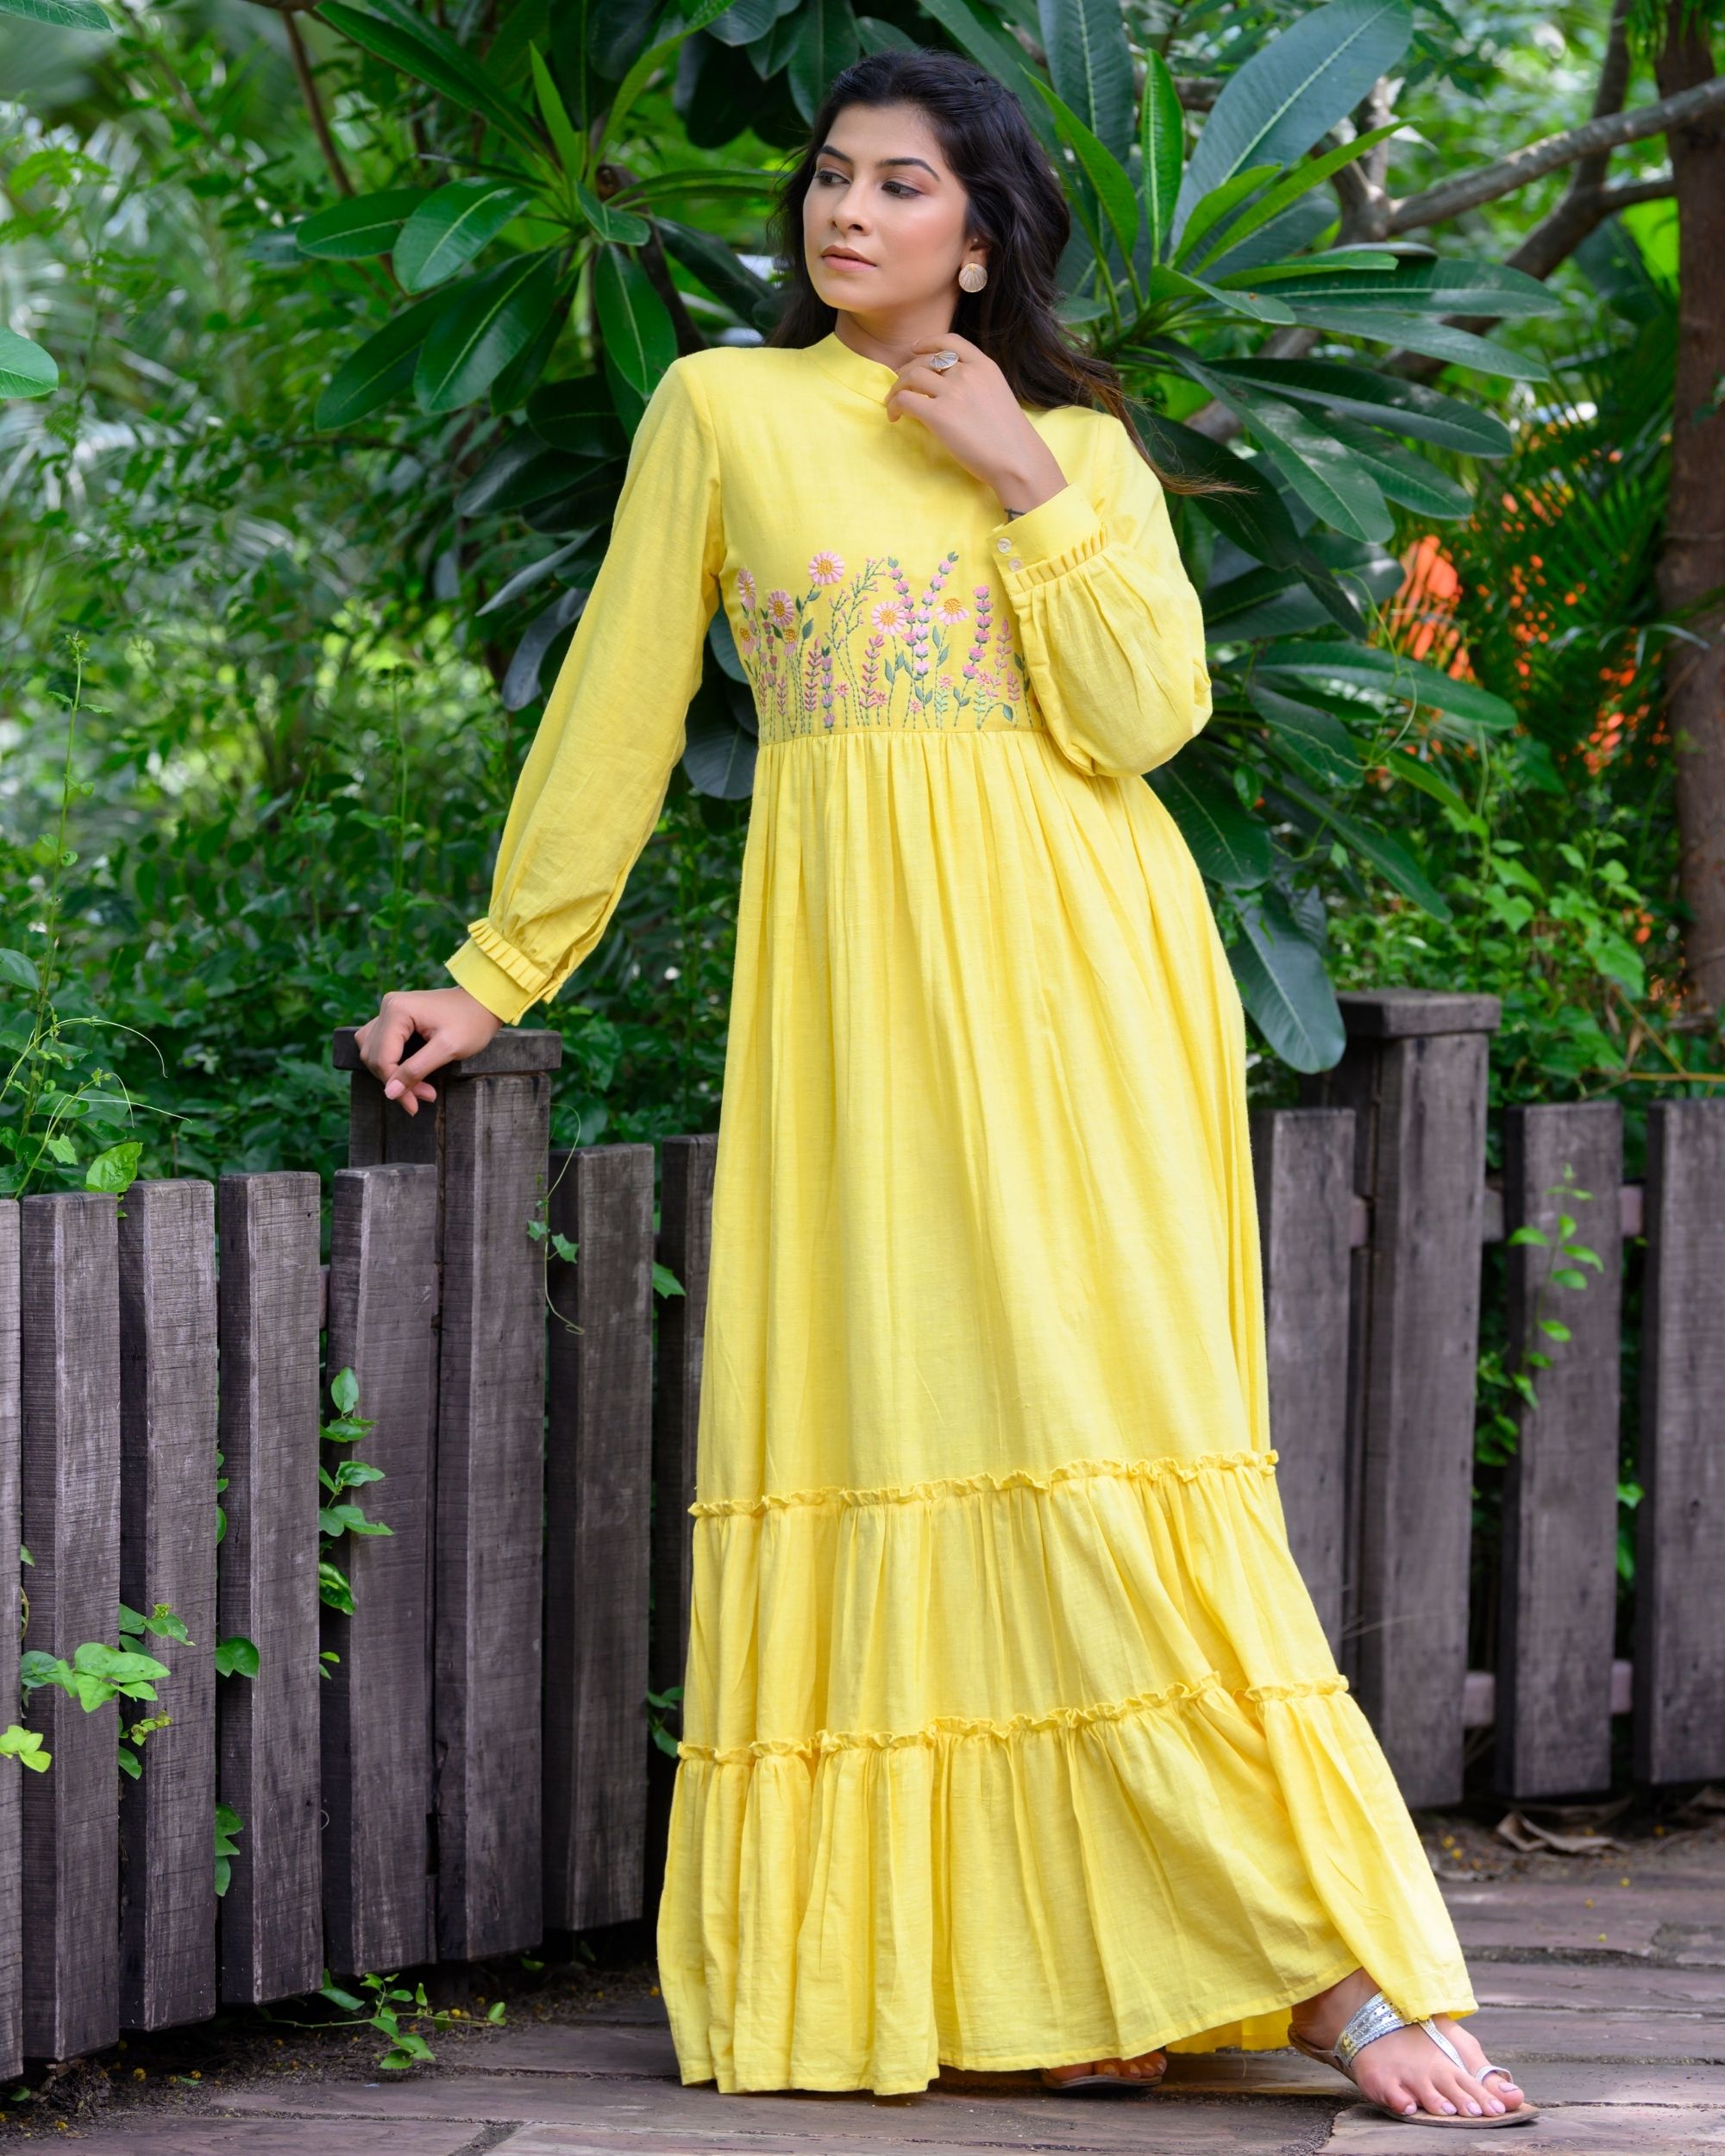 Yellow embroidered ruffled dress by Label Anoh | The Secret Label